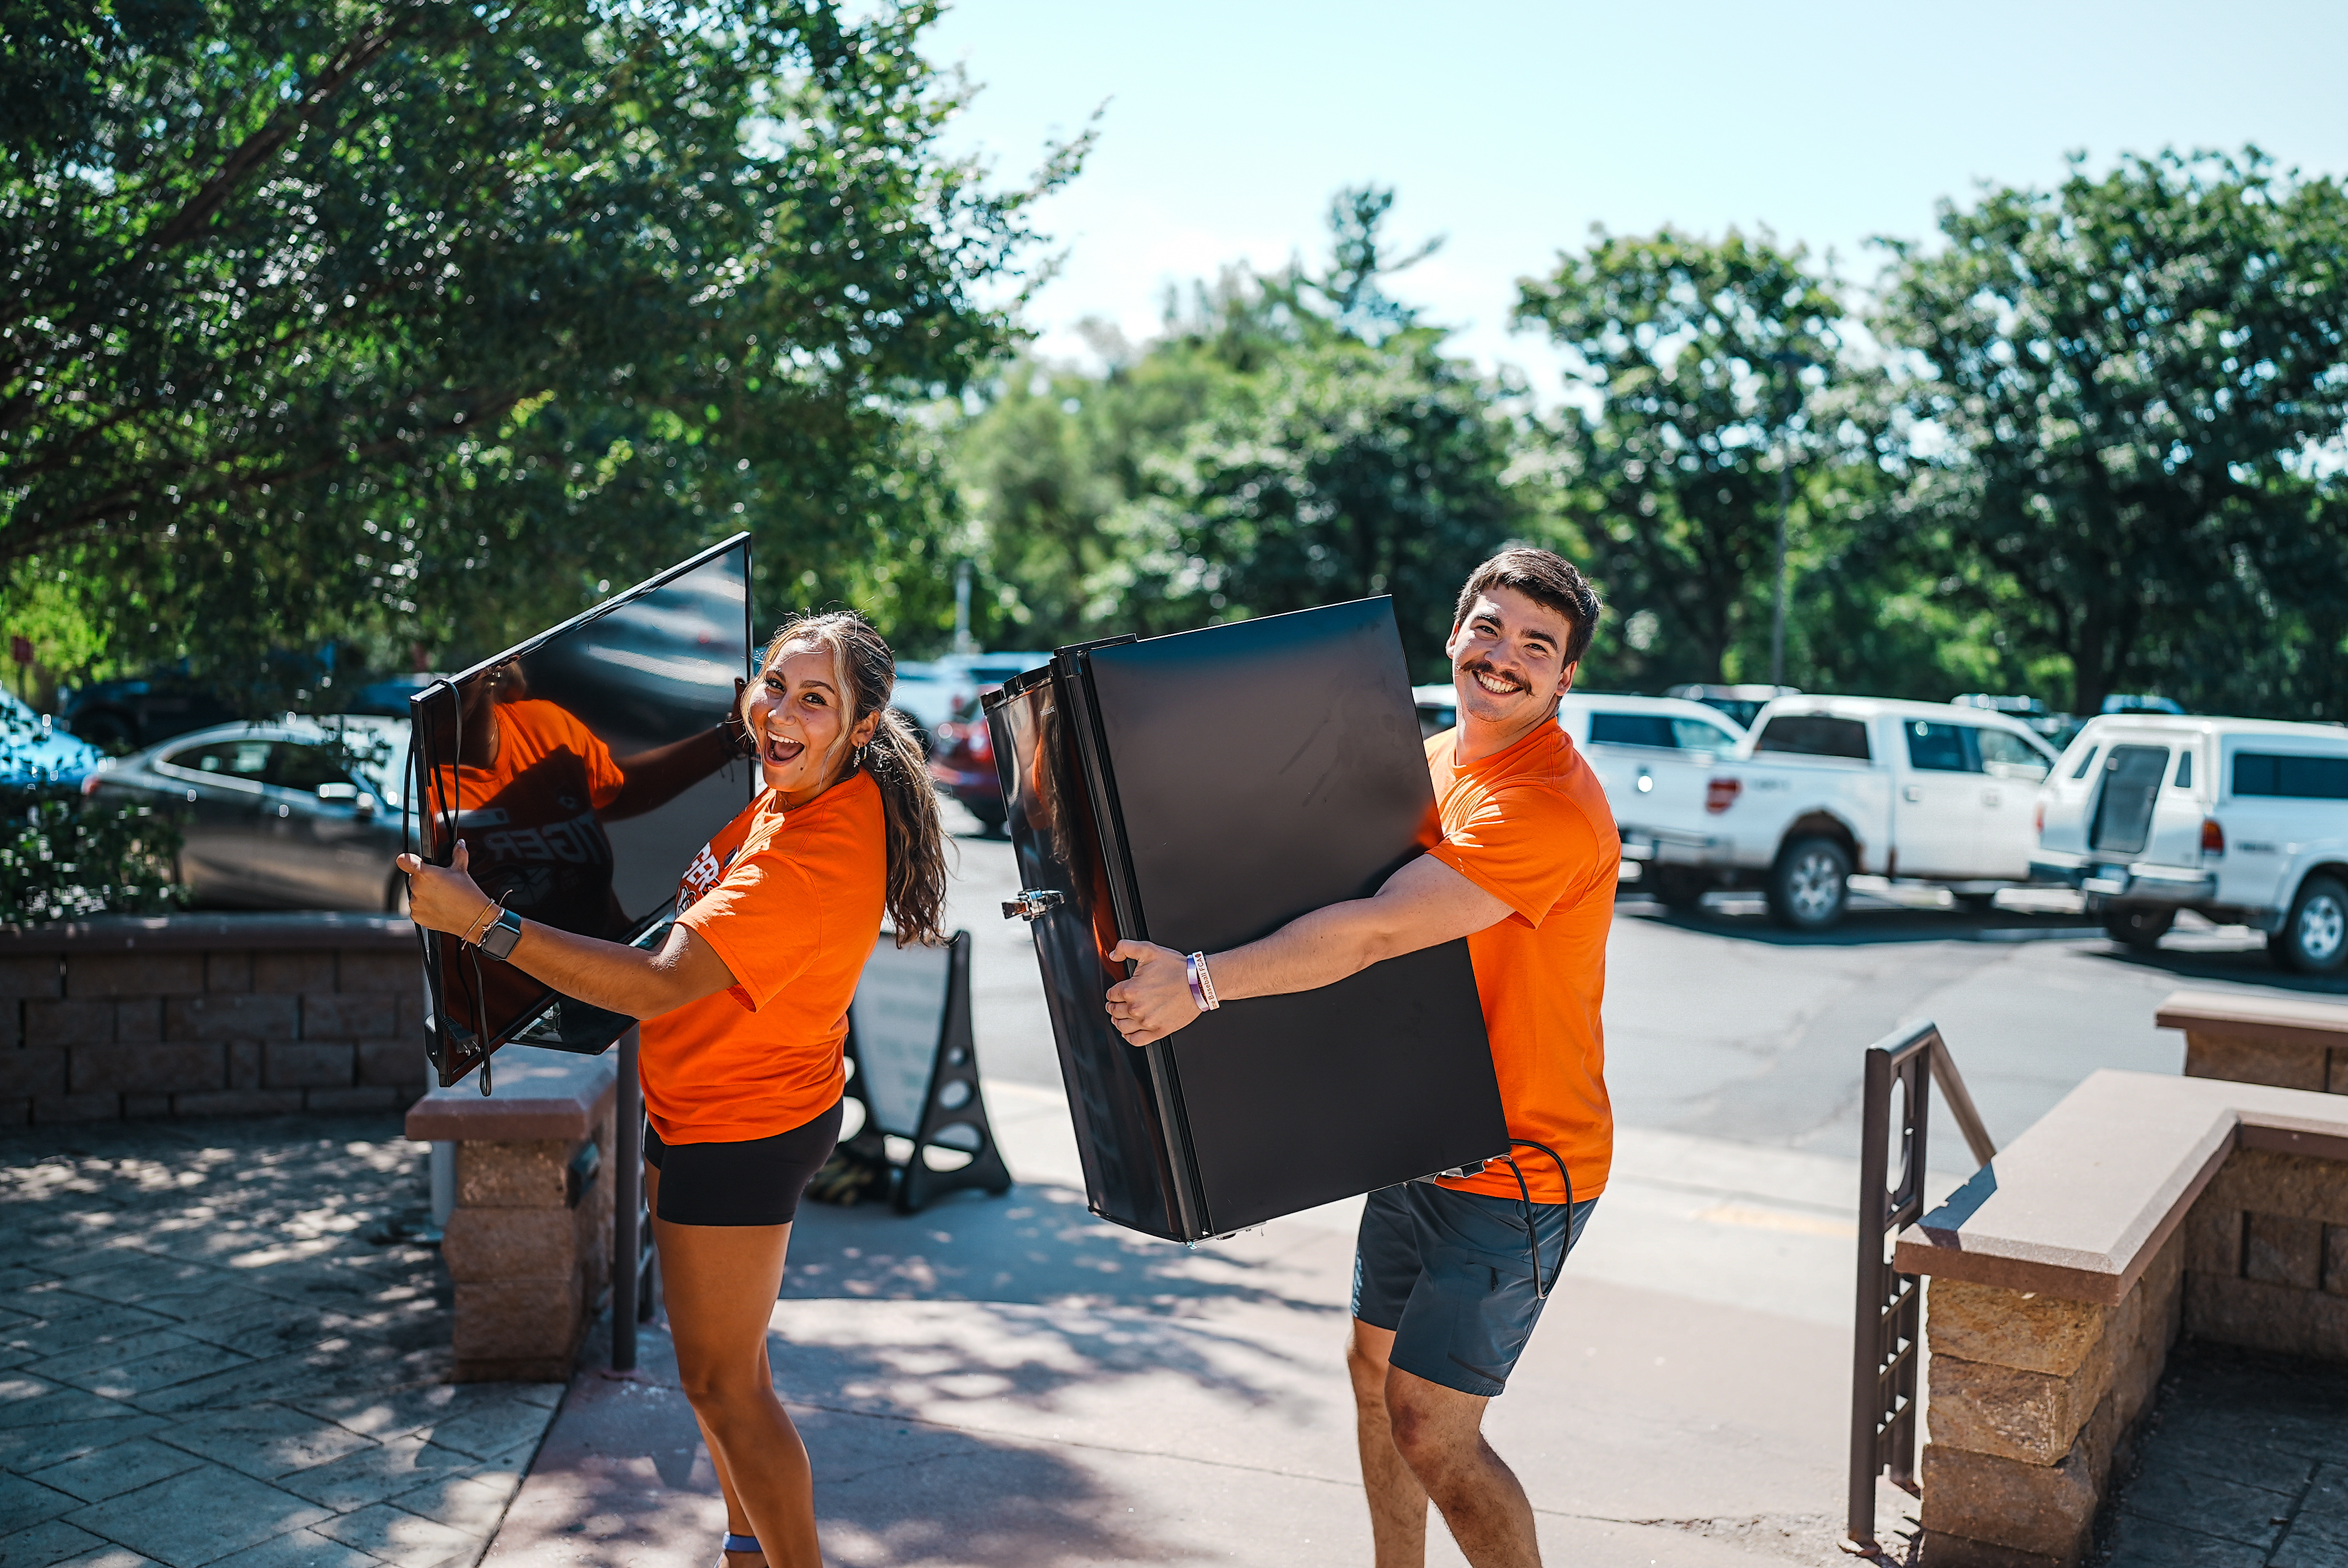 Tiger Takeoff staff helping students move in by carrying their boxes.